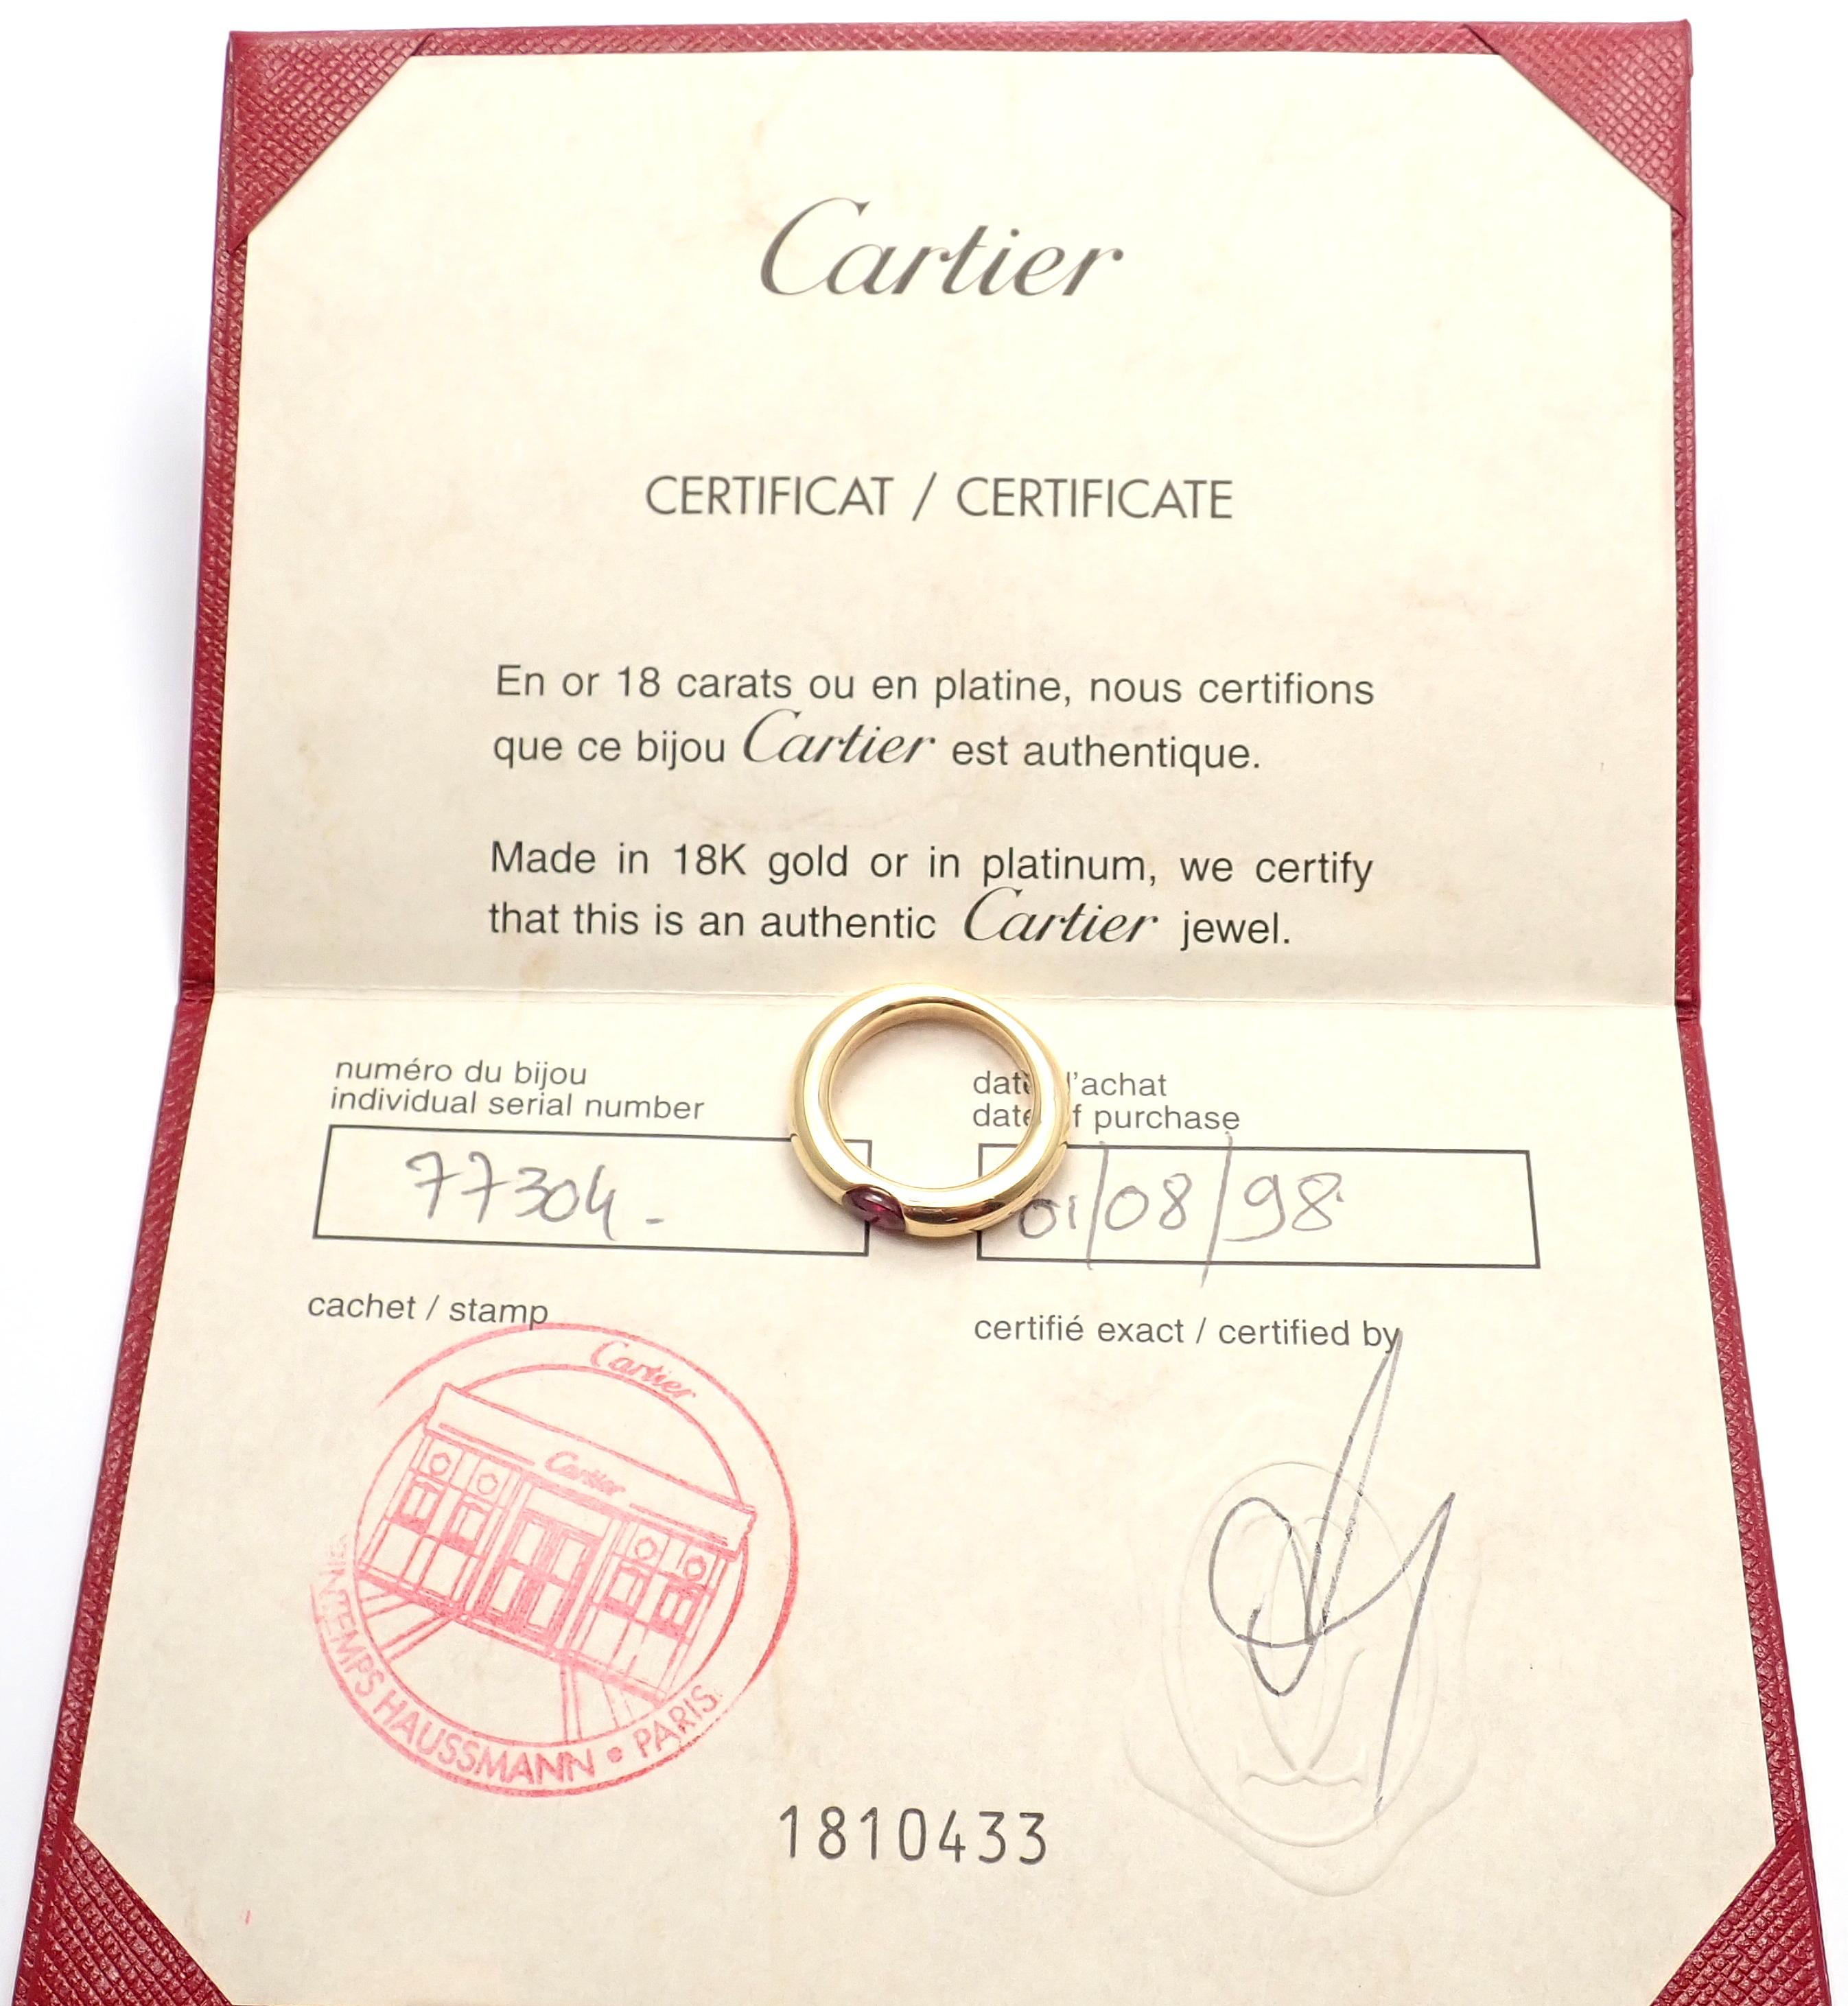 18k Yellow Gold Ellipse Ruby Band Ring by Cartier.
With 1 oval-shaped beautiful ruby 5mm x 4mm.
Details:
Width: 4mm
Weight: 8.9 grams
Ring Size: European 49, US 4 3/4
Stamped Hallmarks: Cartier 750 49 1992 77304
*Free Shipping within the United